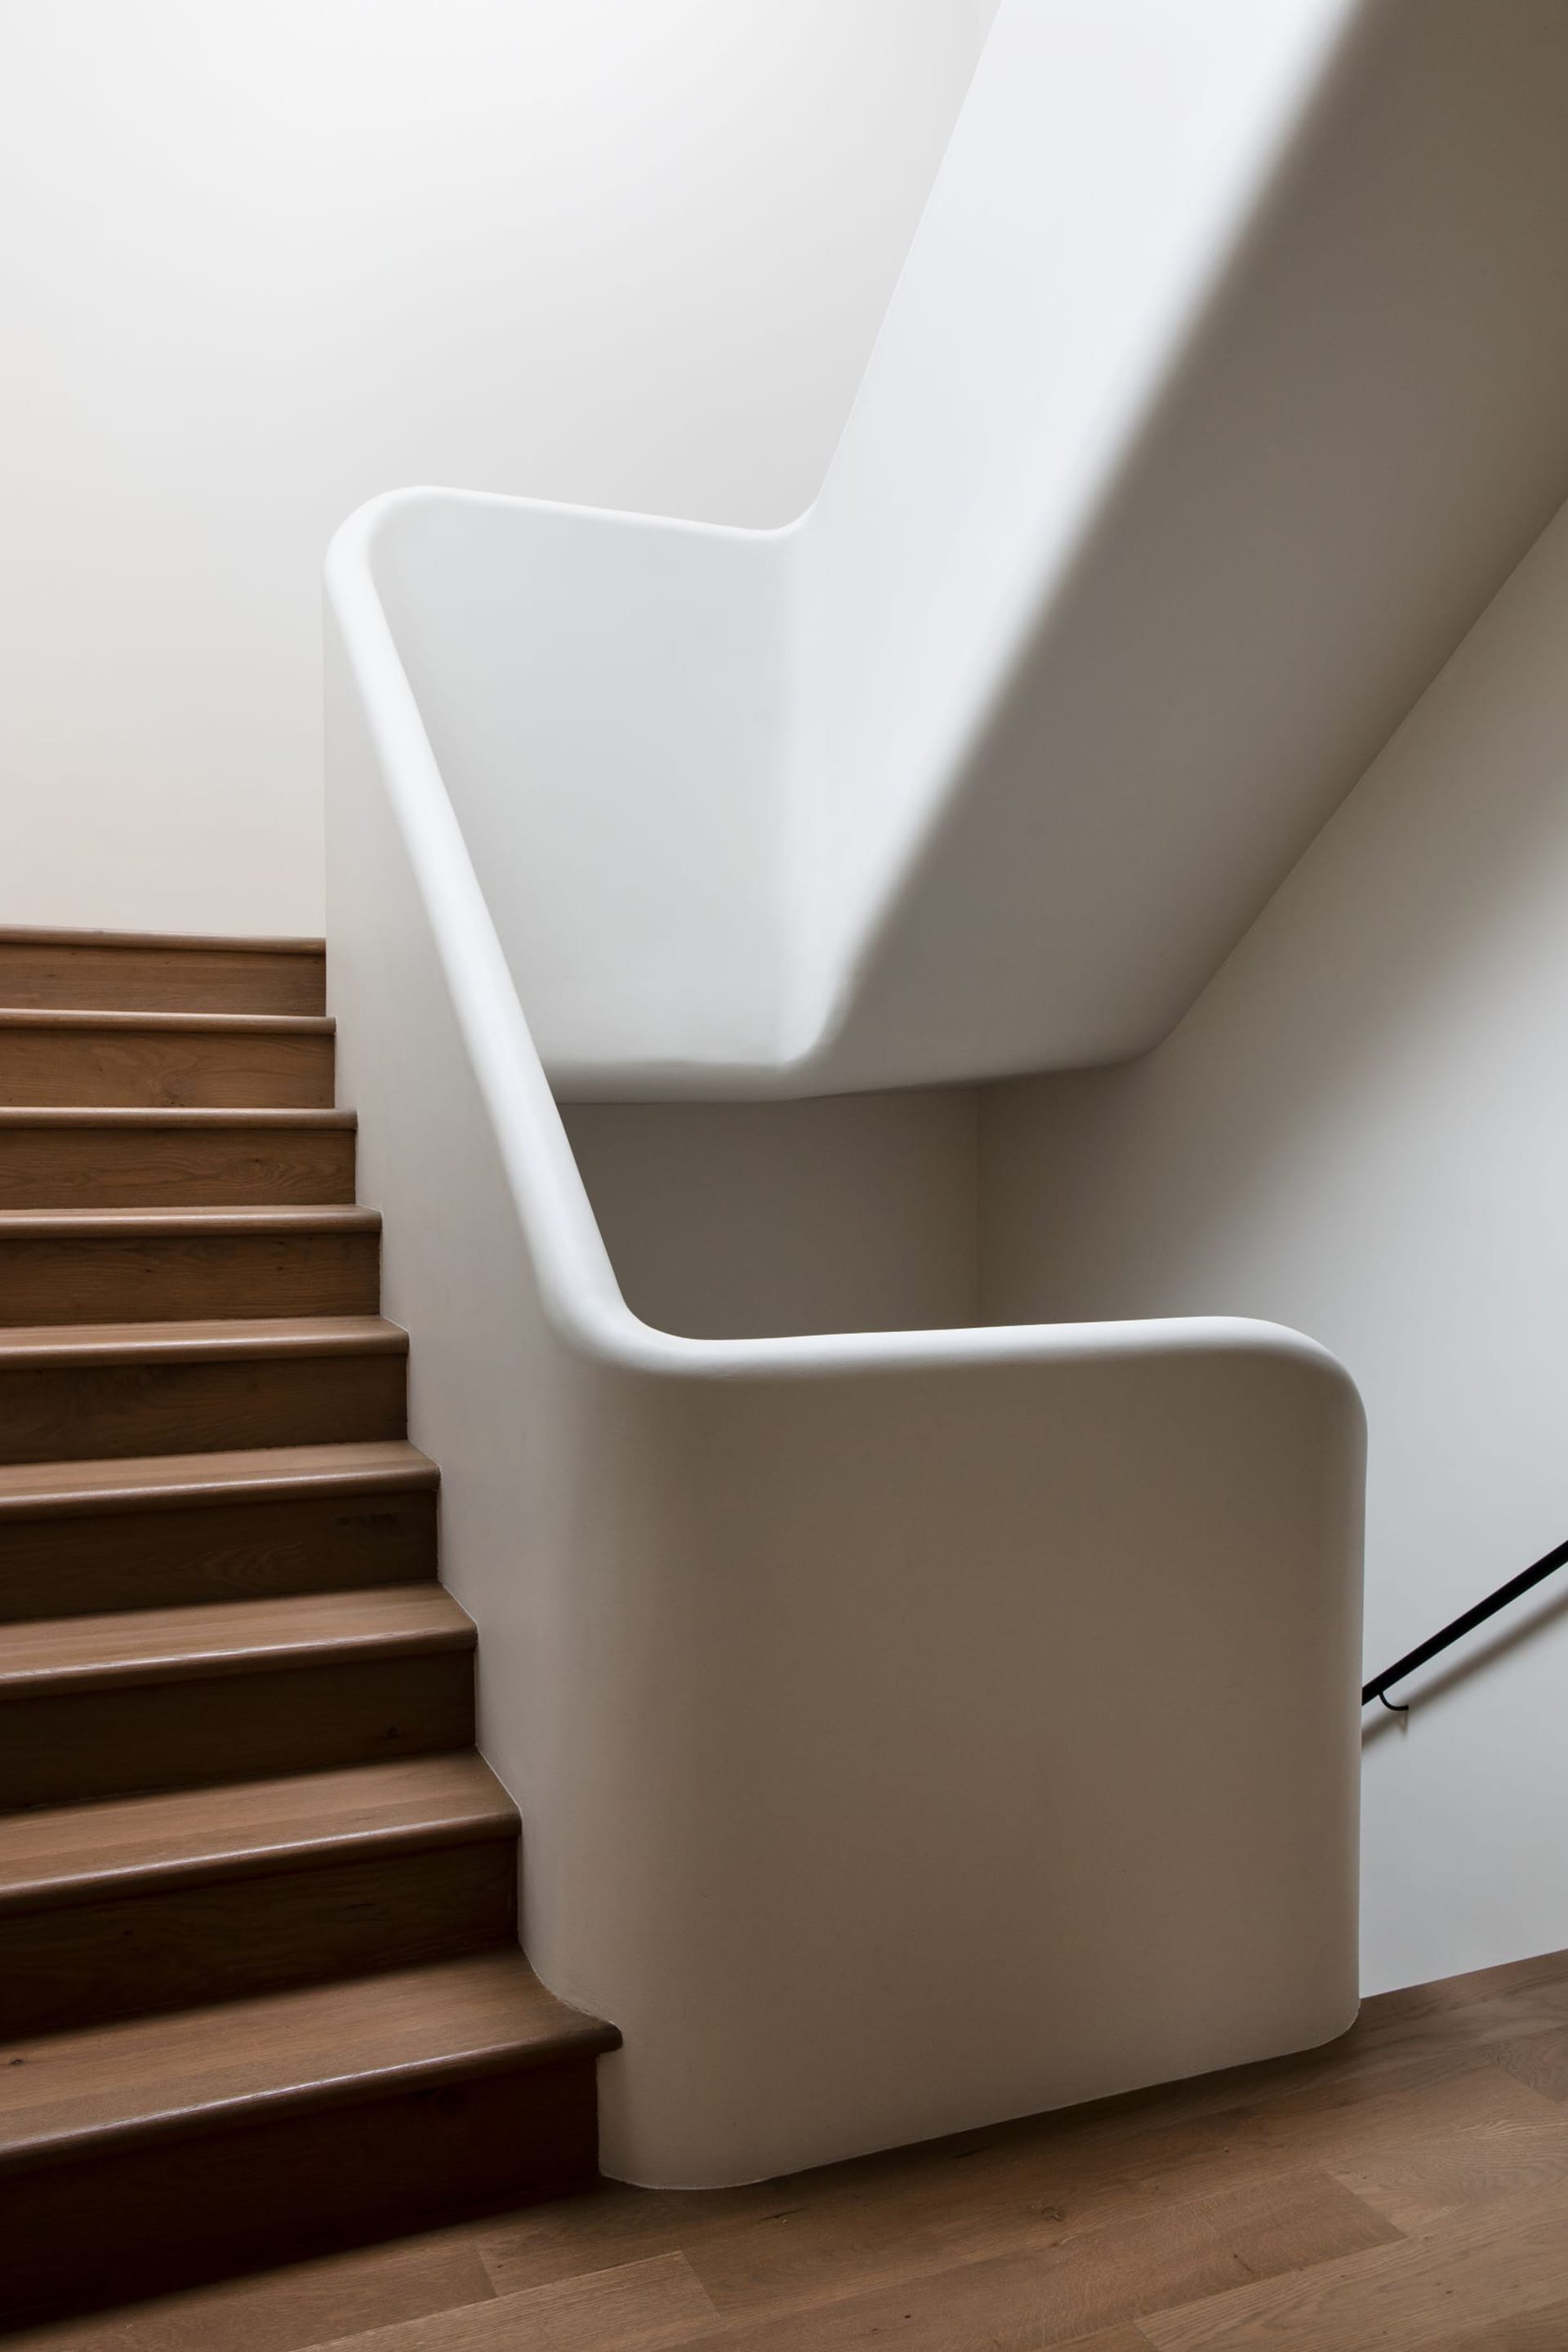 Modern, plaster white curved staircase.